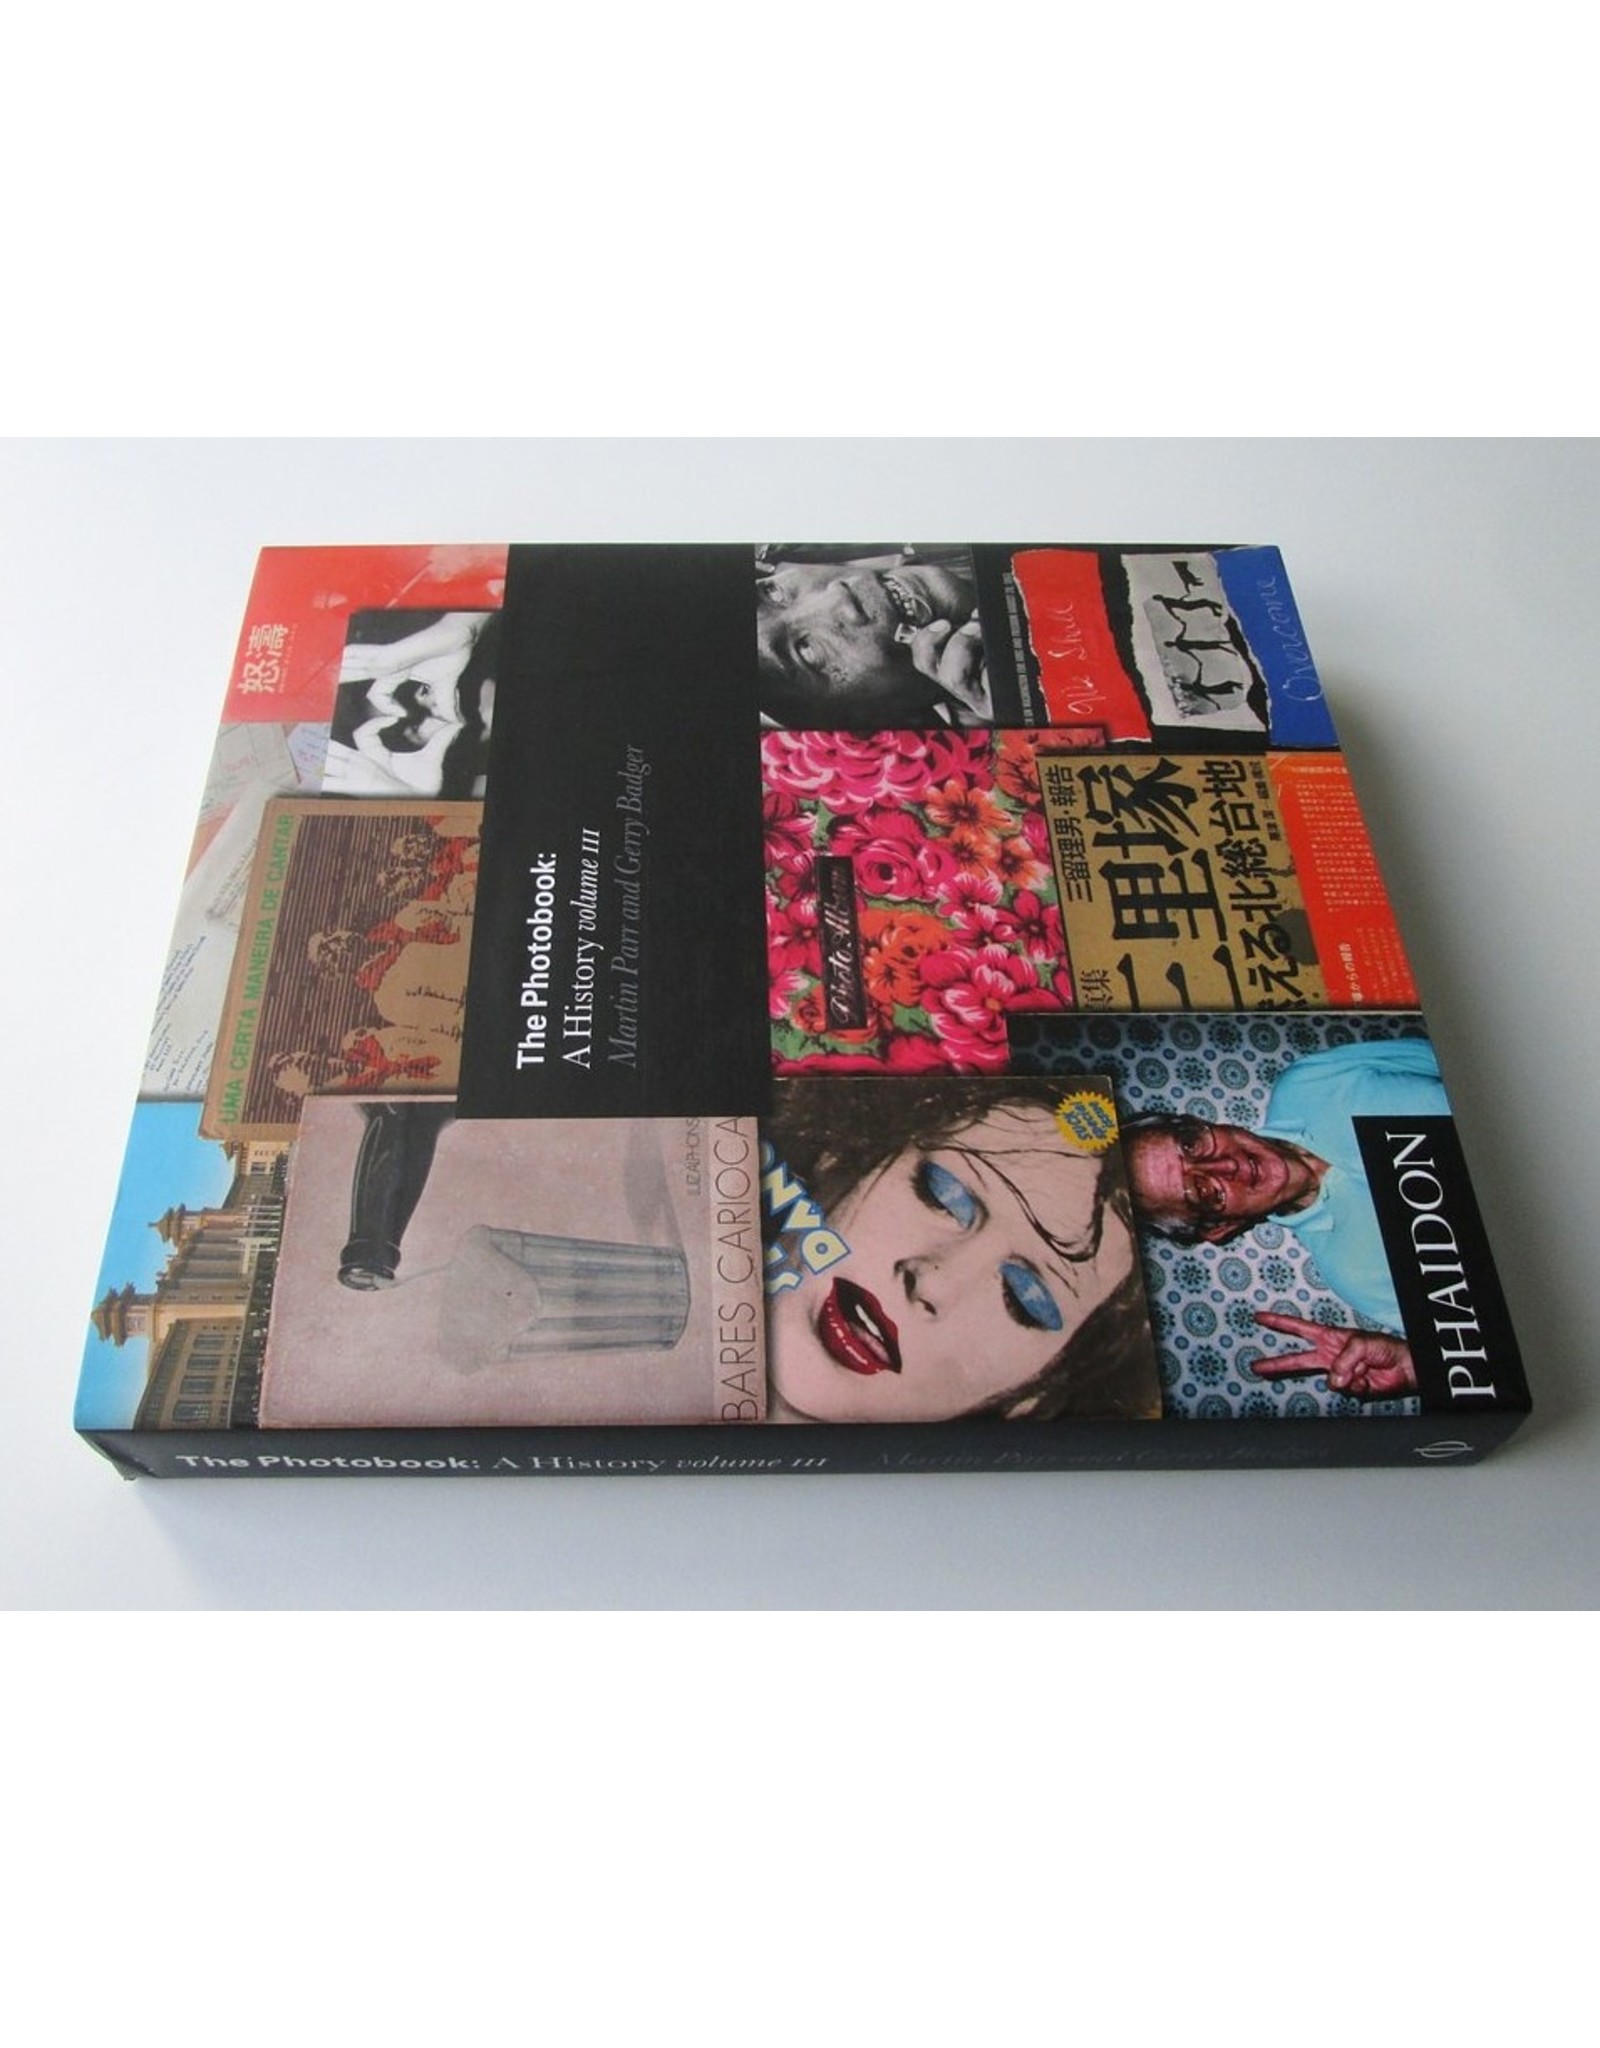 Martin Parr & Gerry Badger - The Photobook: A History. Volume III